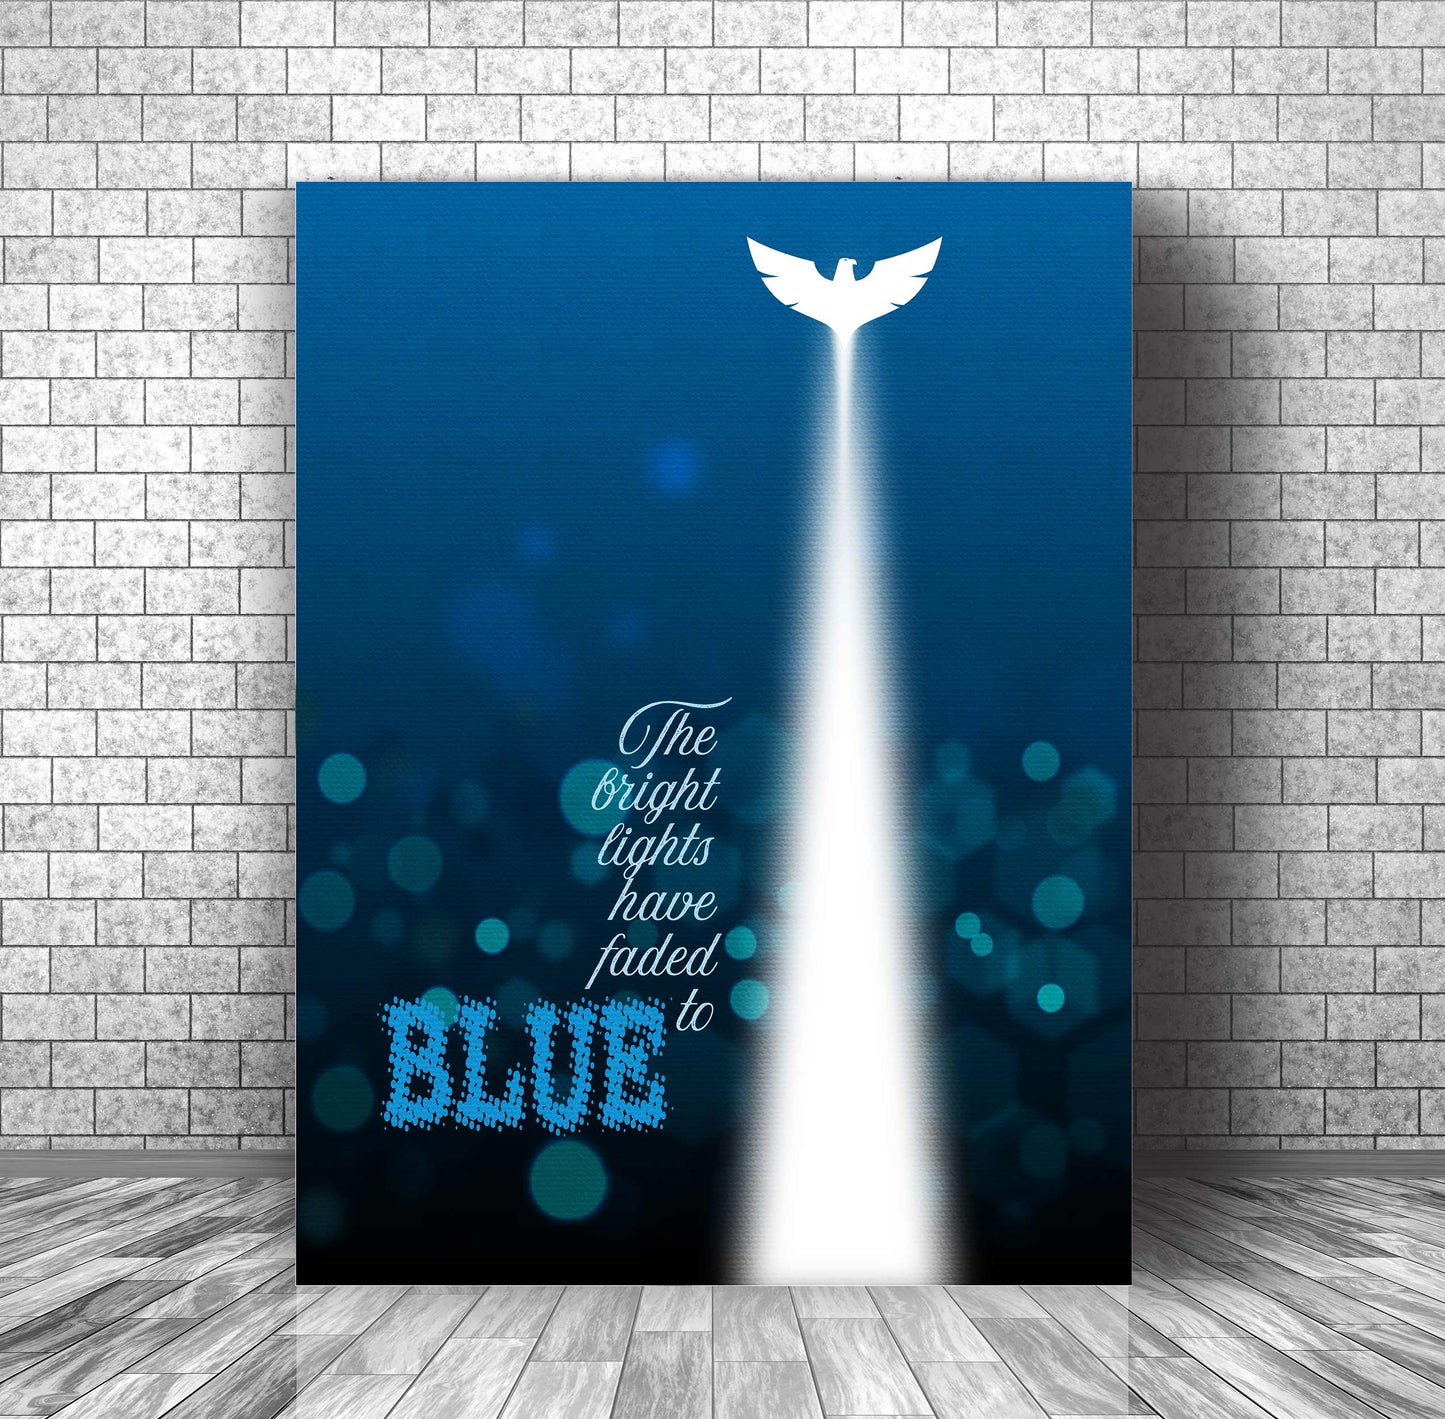 Take it to the Limit by the Eagles - Song Lyric Music Art Song Lyrics Art Song Lyrics Art 11x14 Canvas Wrap 